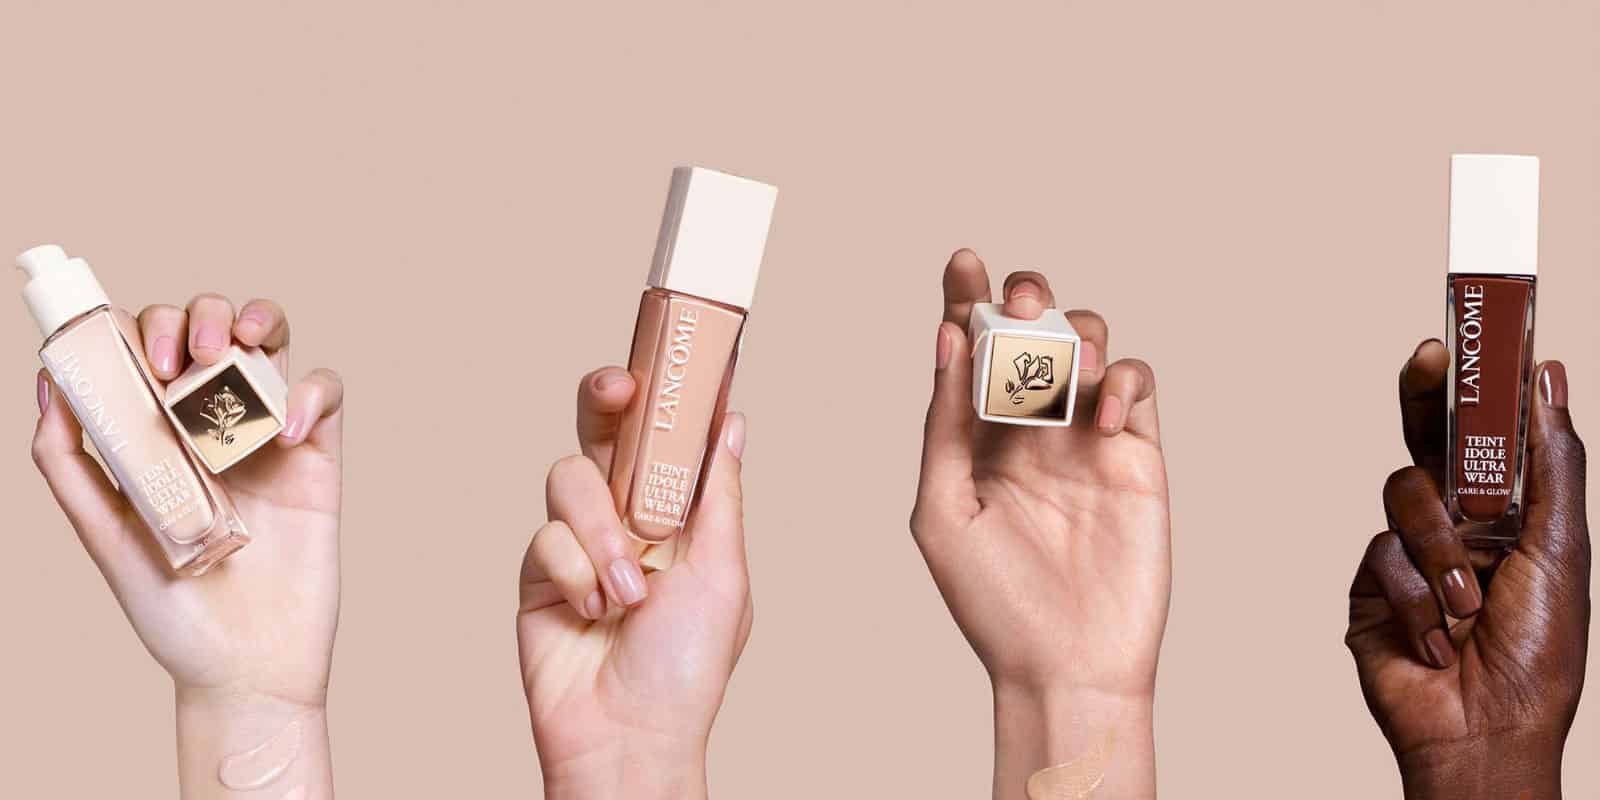 Prominent Primitive Also Get A Healthy Glow With Lancôme's New Teint Idole Ultra Care & Glow Wear  Foundation